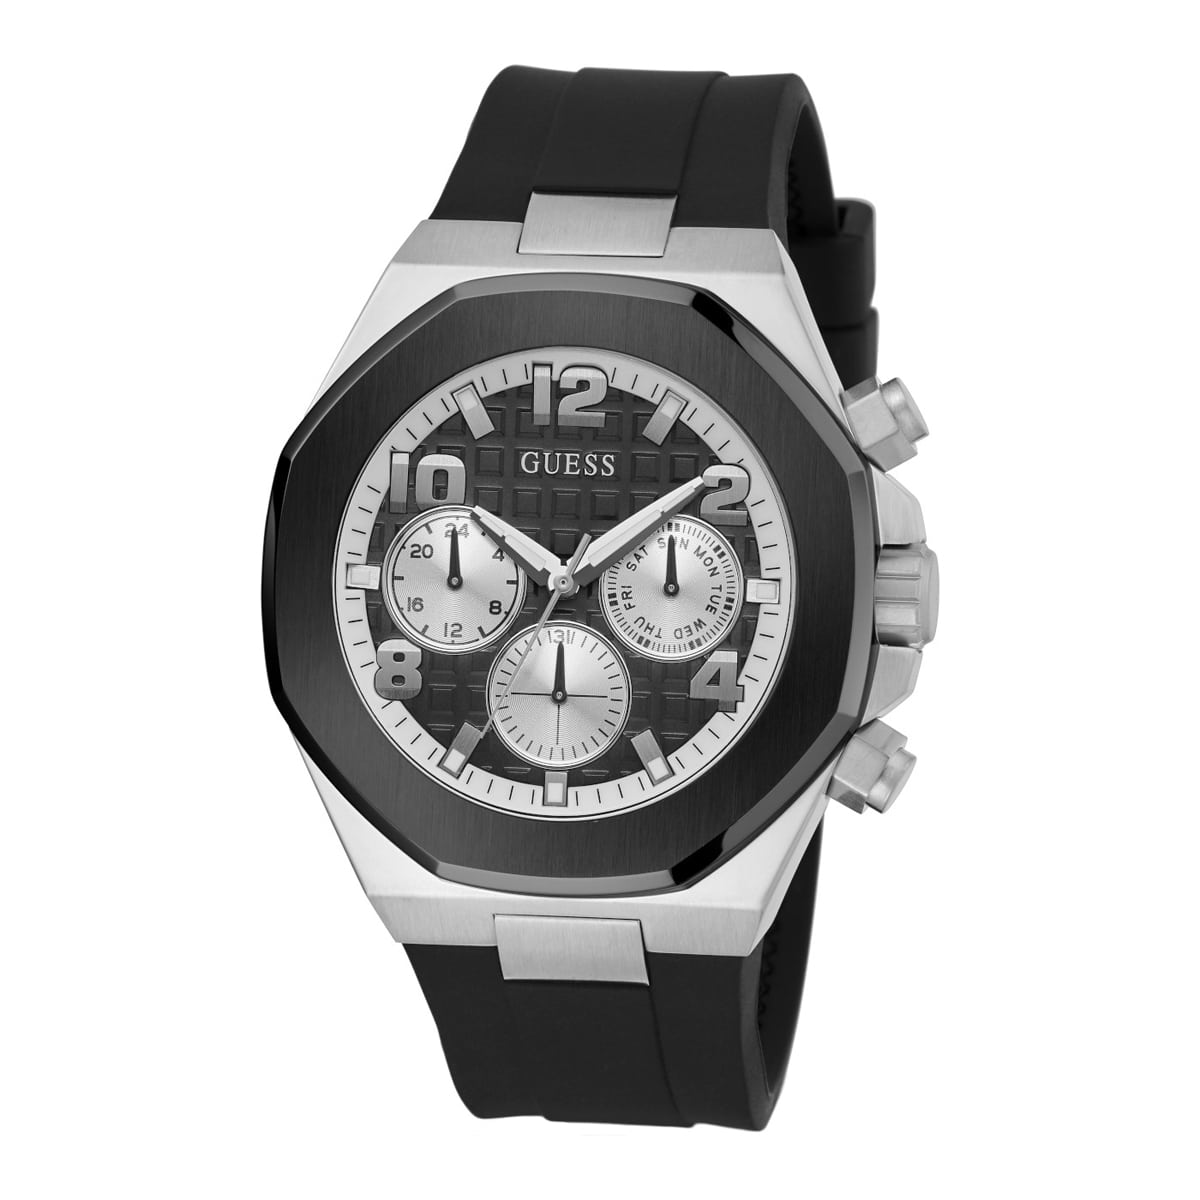 MONTRE GUESS EMPIRE HOMME M.FONCTION SILICONE